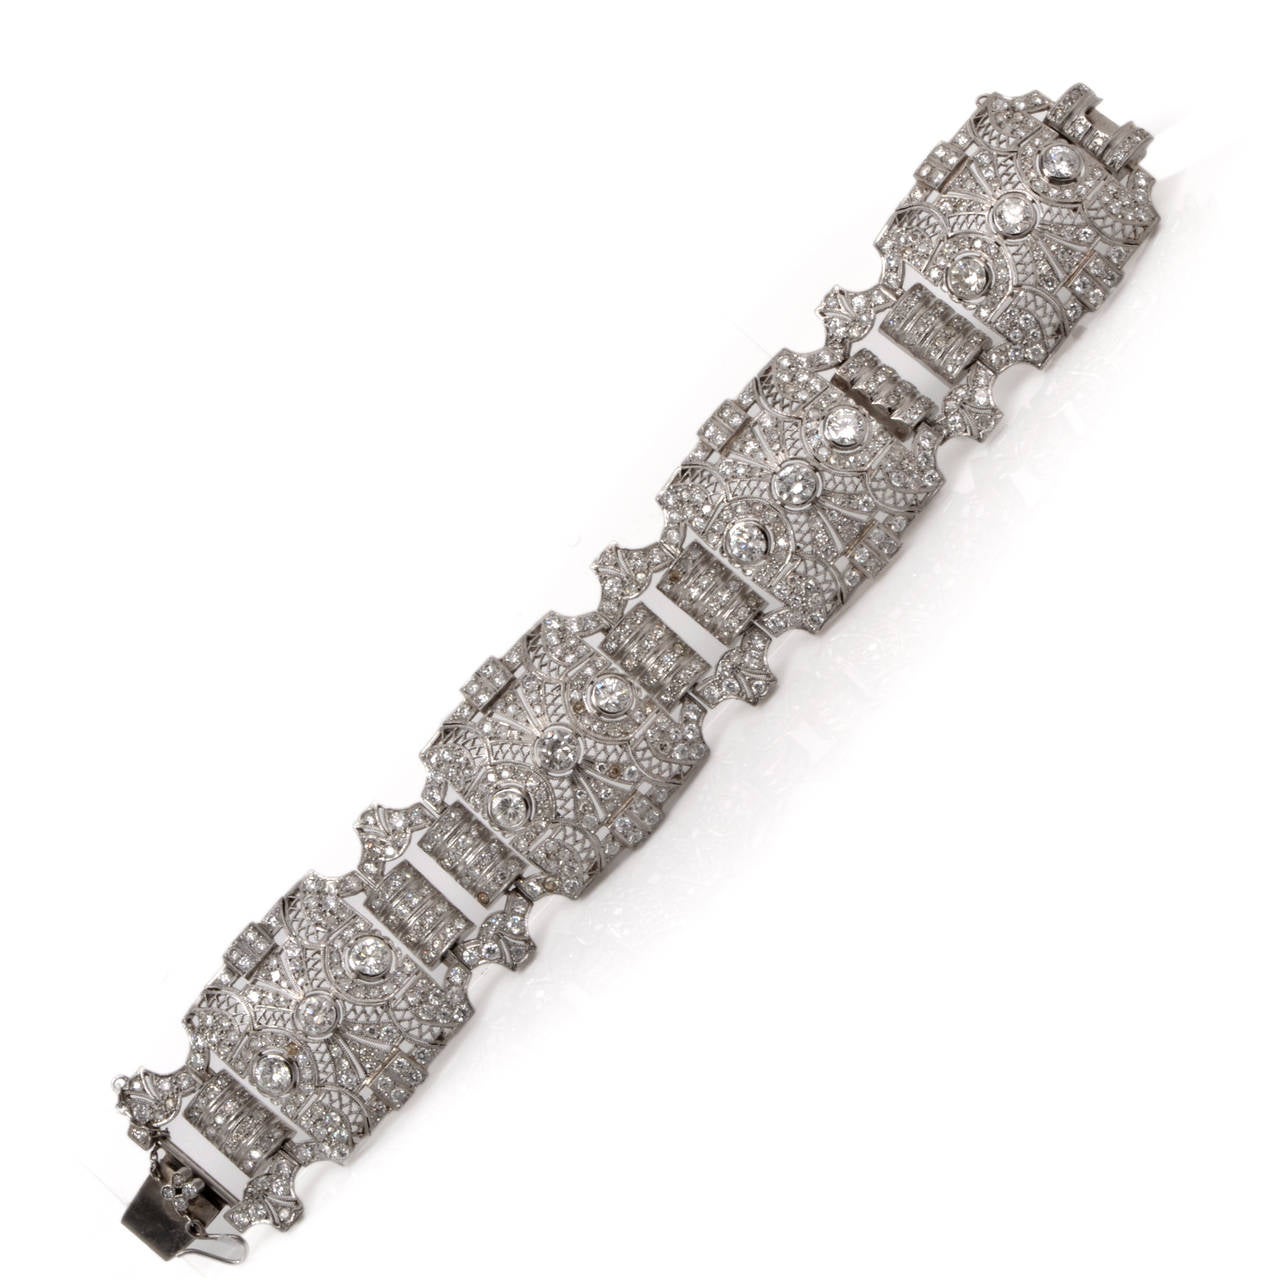 This diamond link bracelet of captivatifng aesthetic is crafted in solid platinum, weighs approx. 84.4 grams amd measures 7 1/2